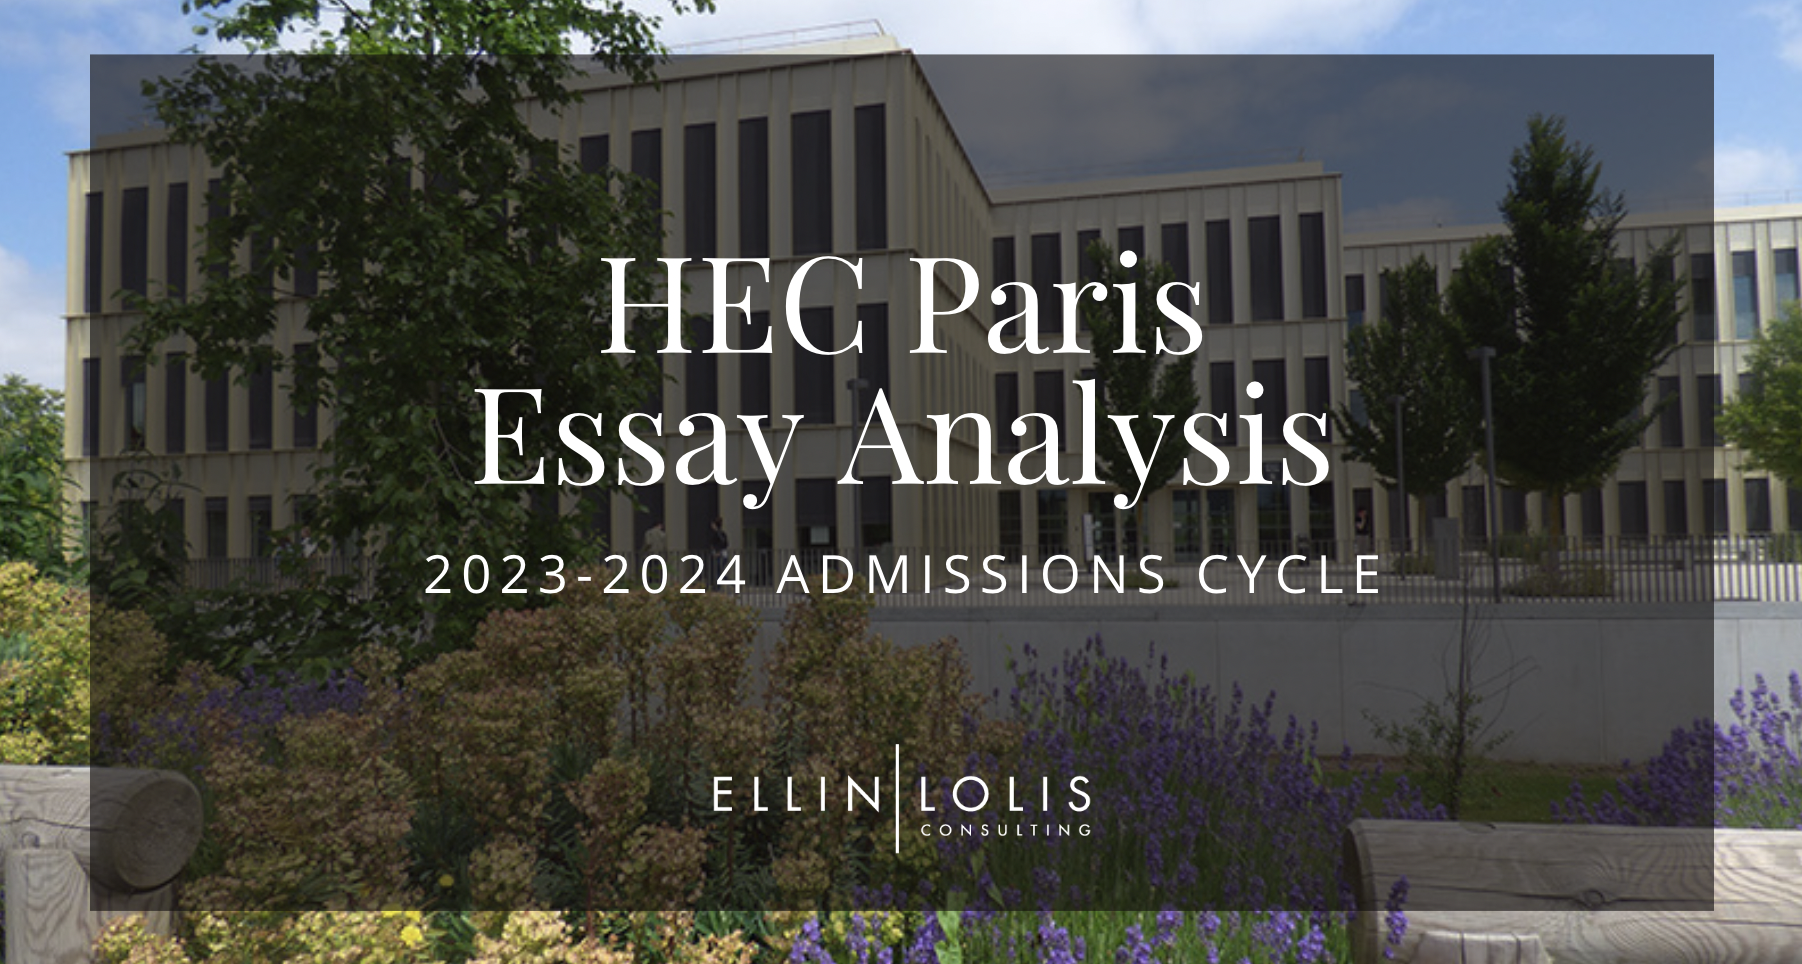 hec essay writing competition results 2022